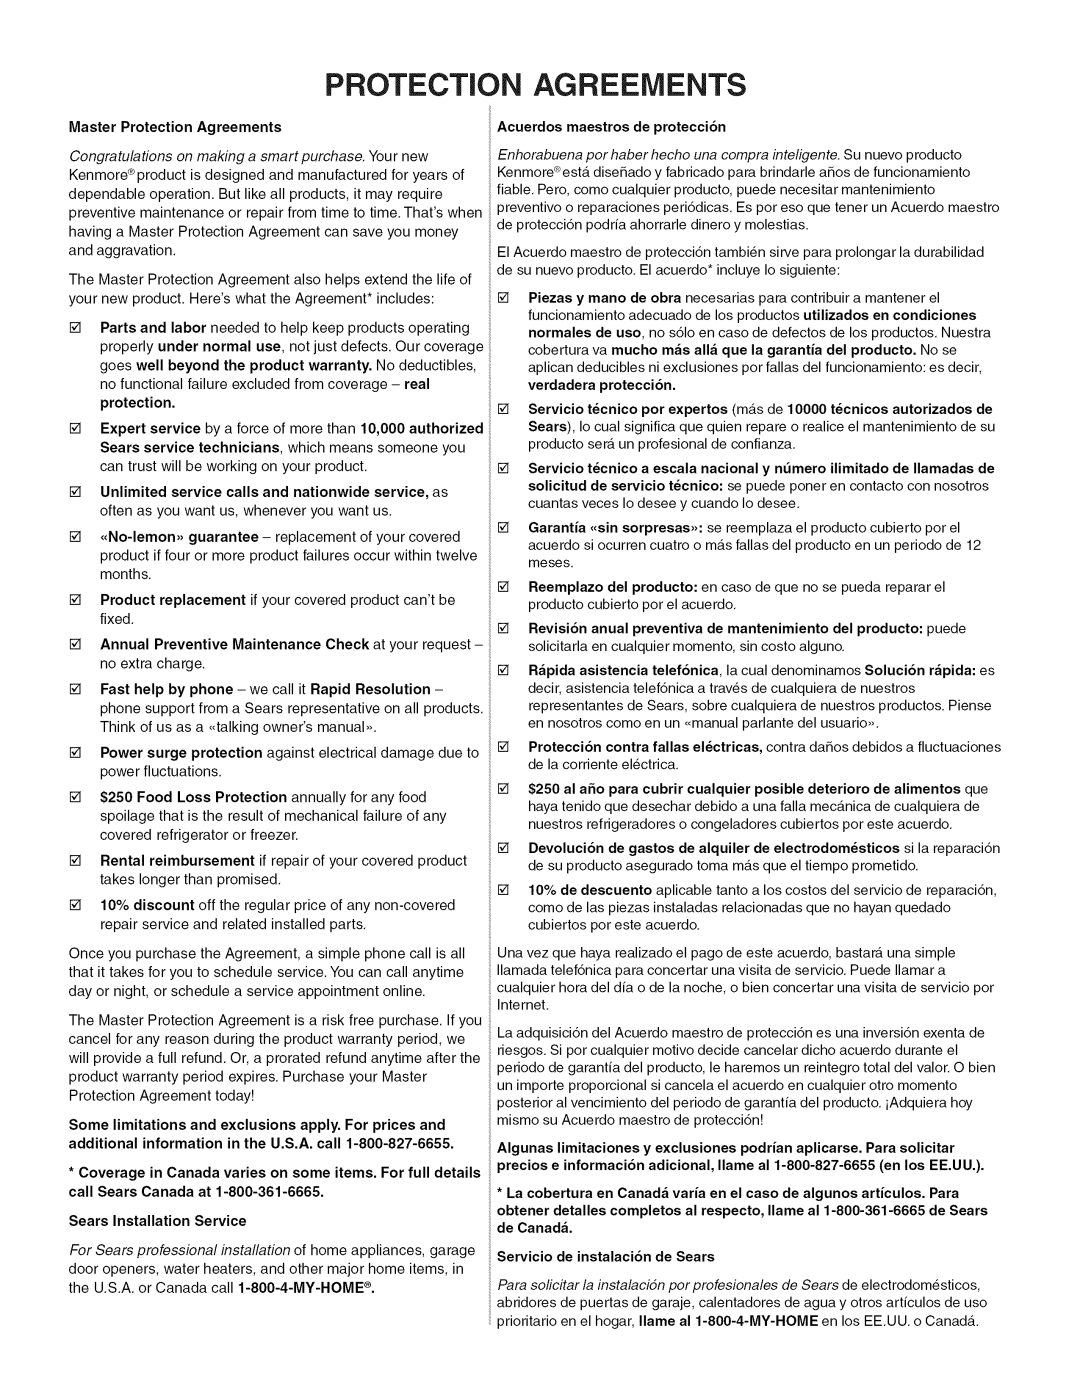 Kenmore 790. 4045 manual Master Protection Agreements 